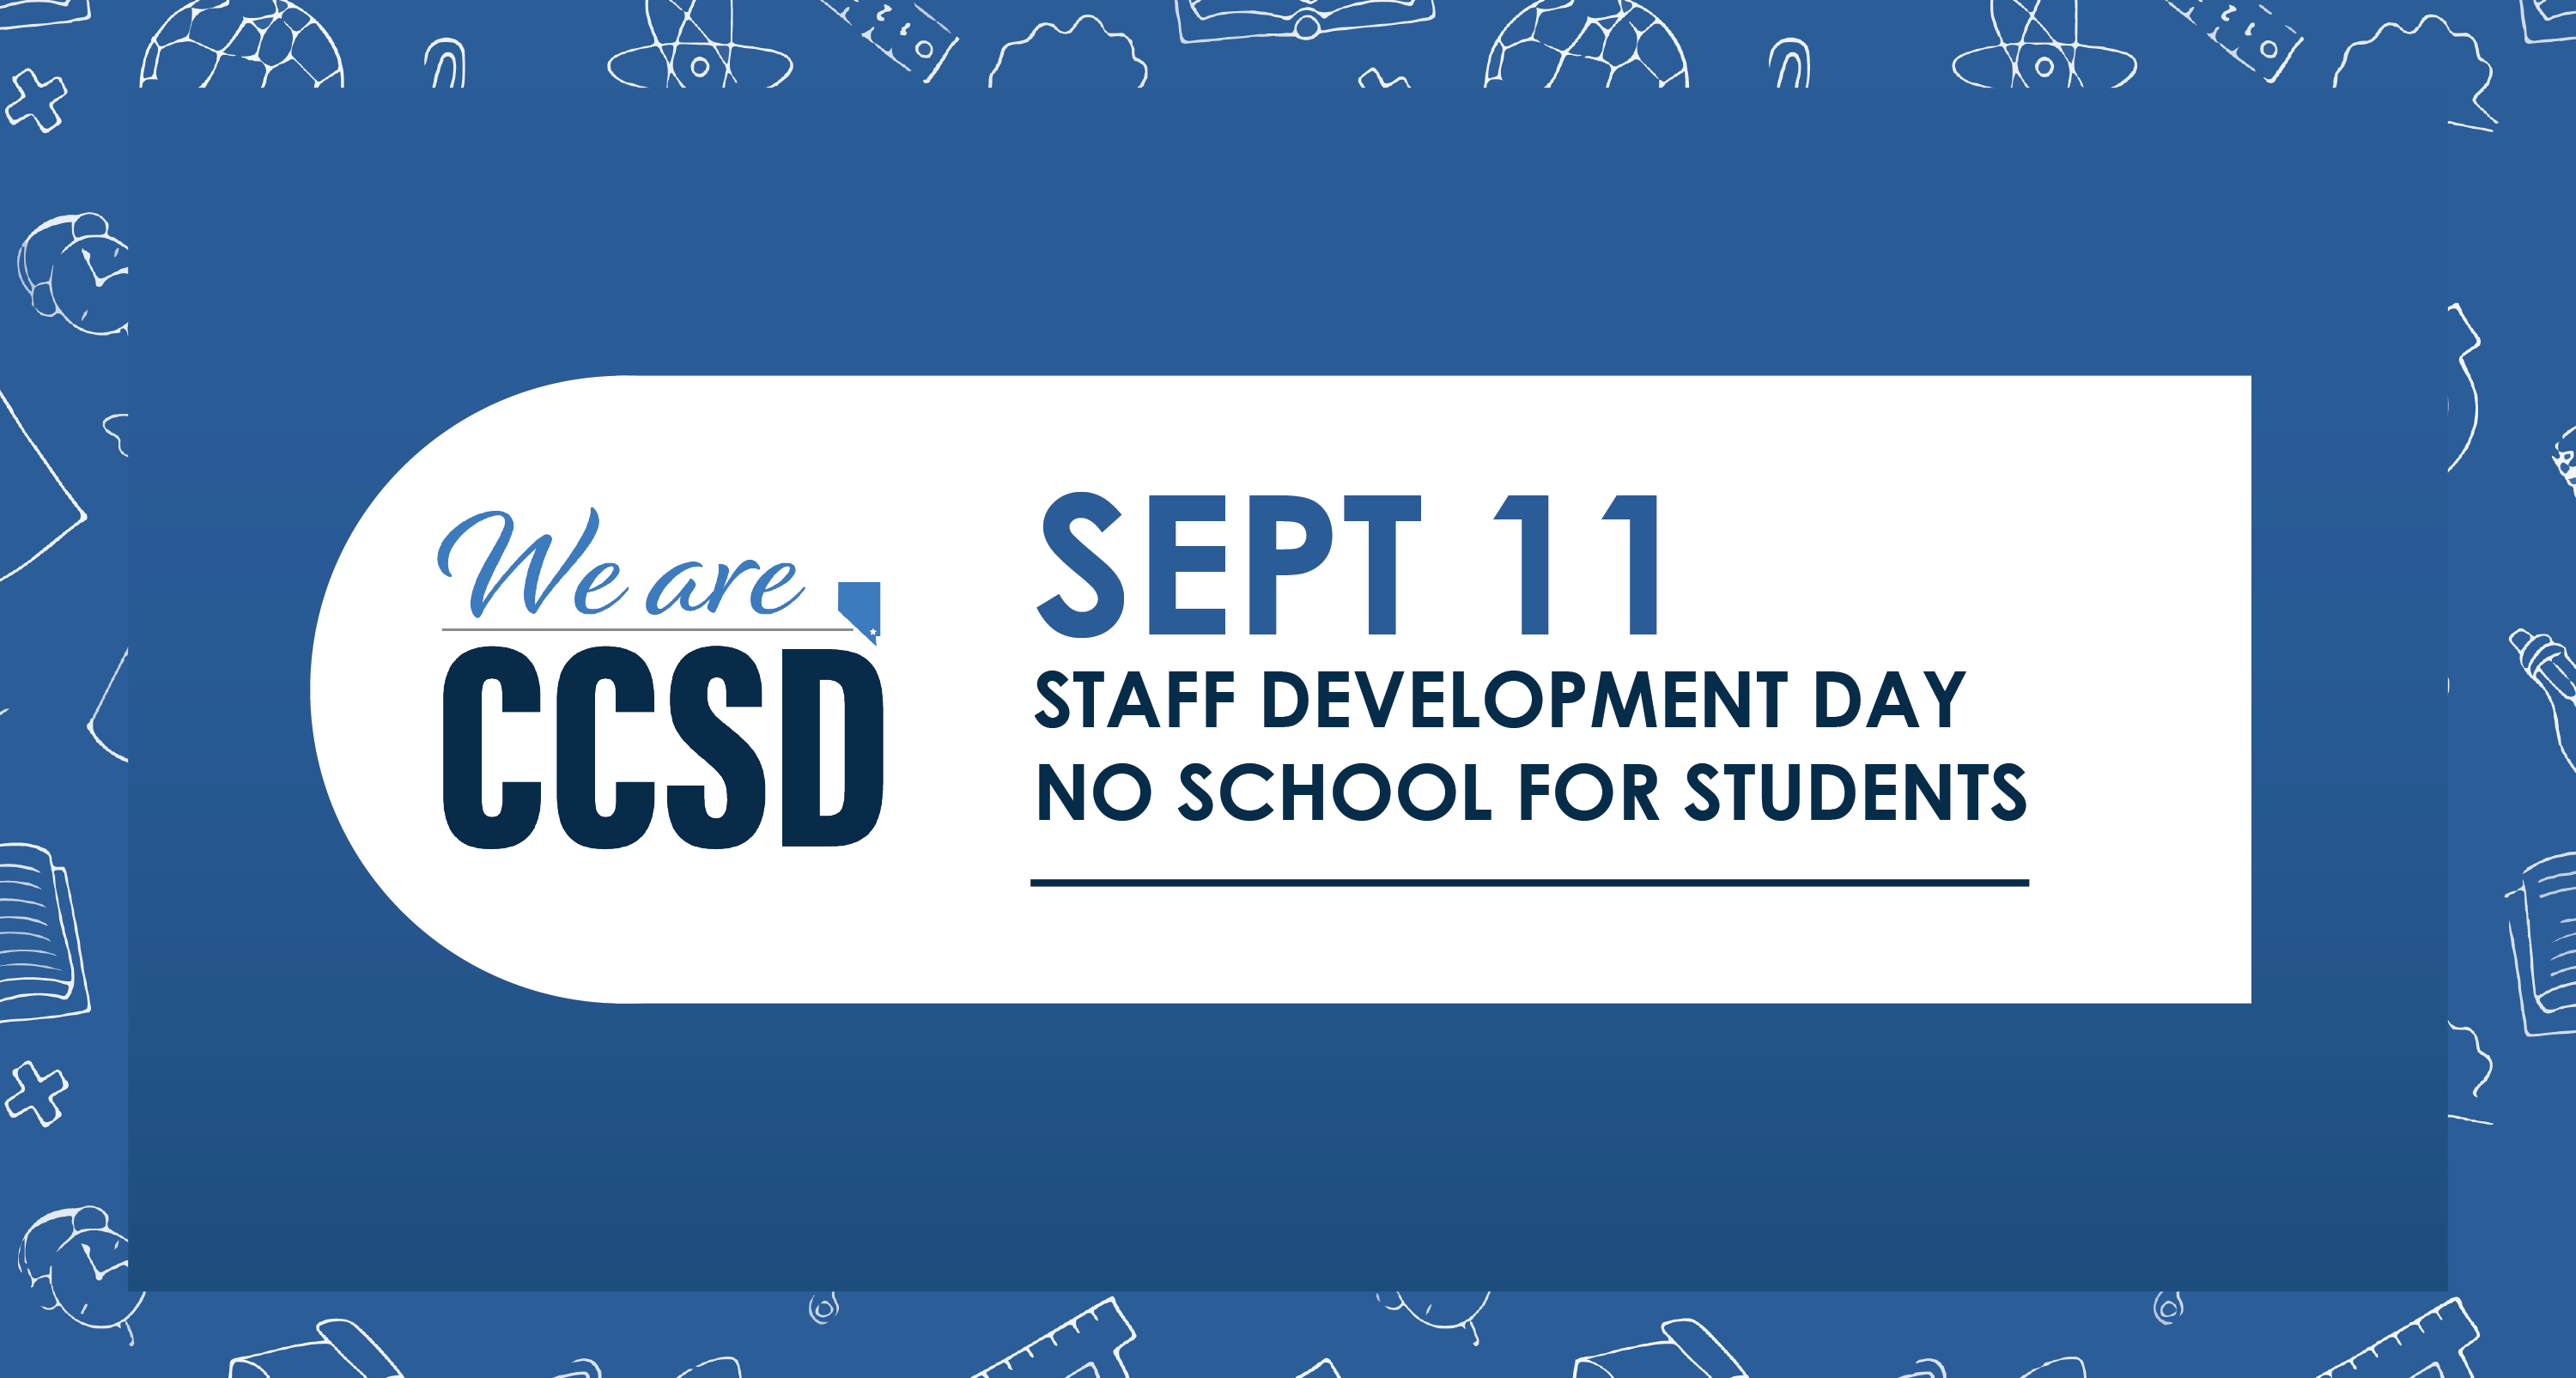 No school for students on Monday, Sept. 11 for Staff Development Day